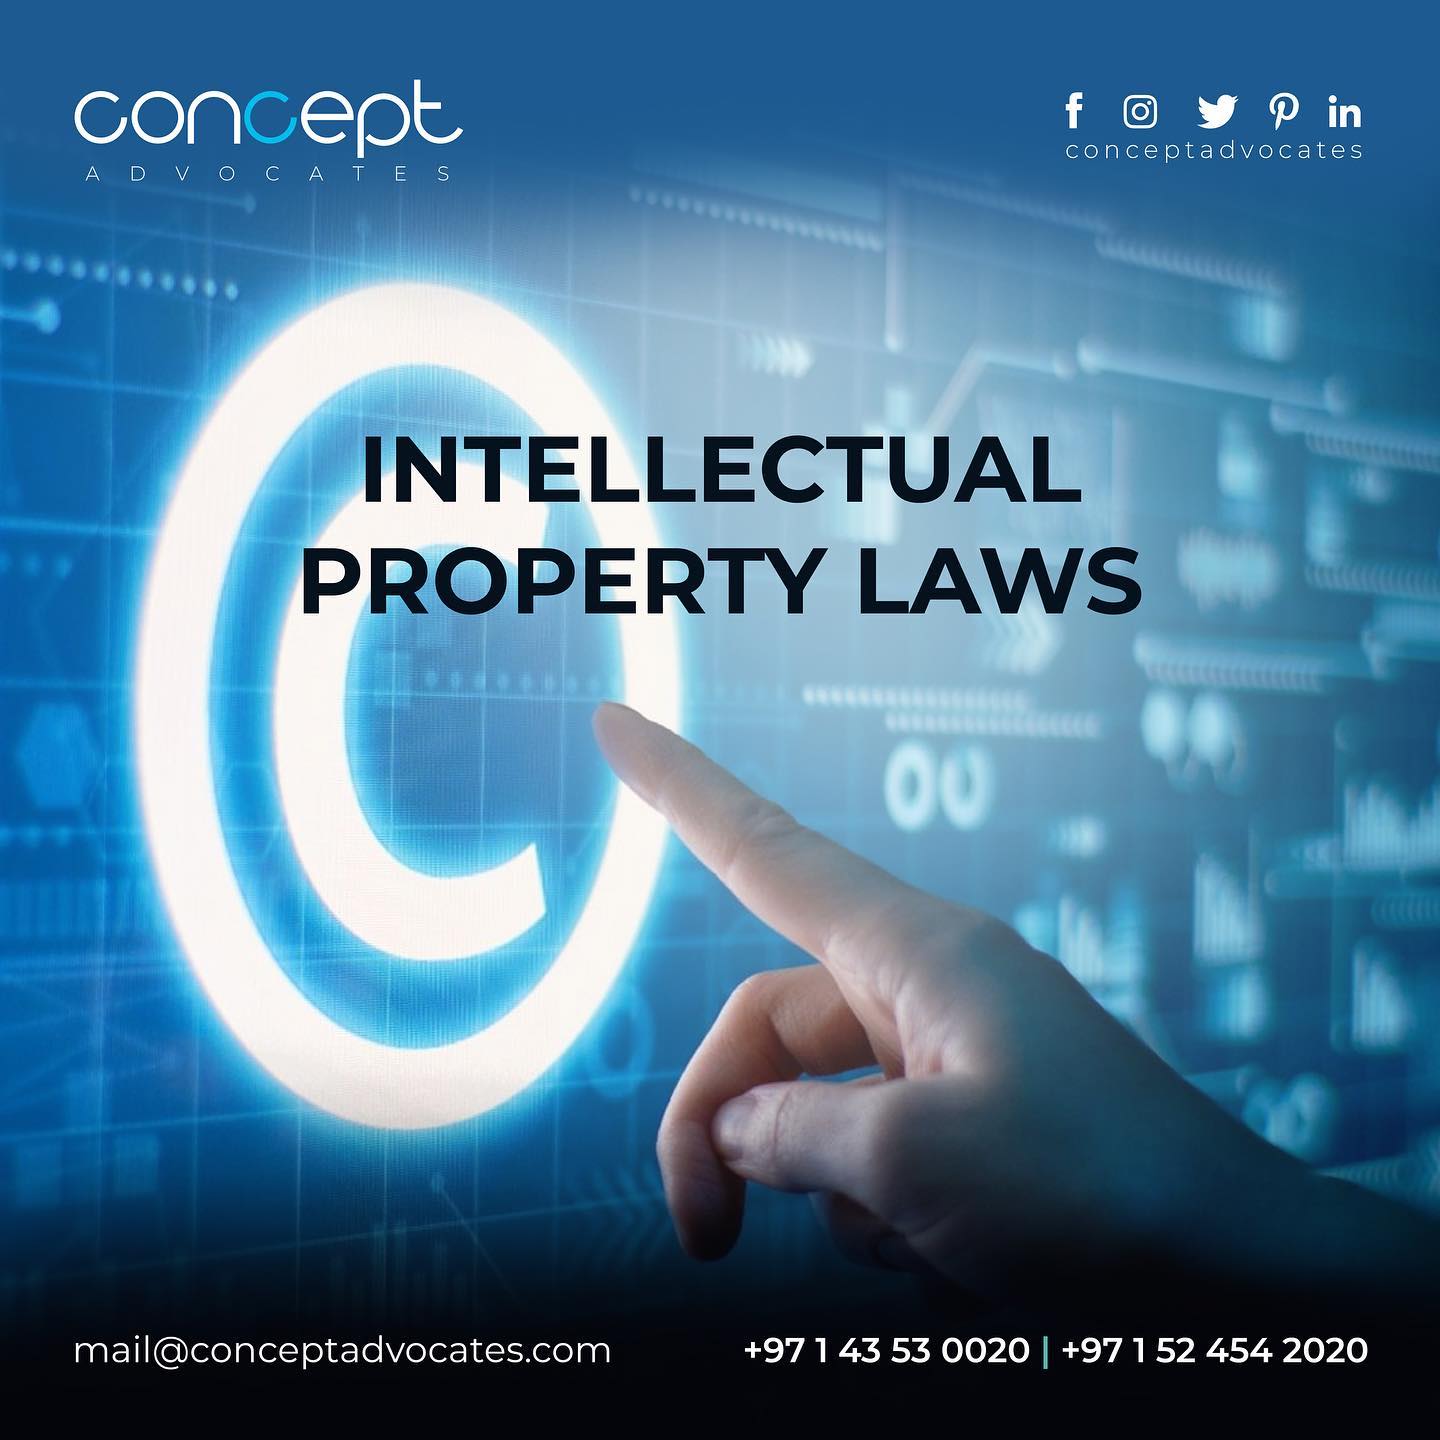 Our ServicesIntellectual Property Law#Law #intellectuallaw